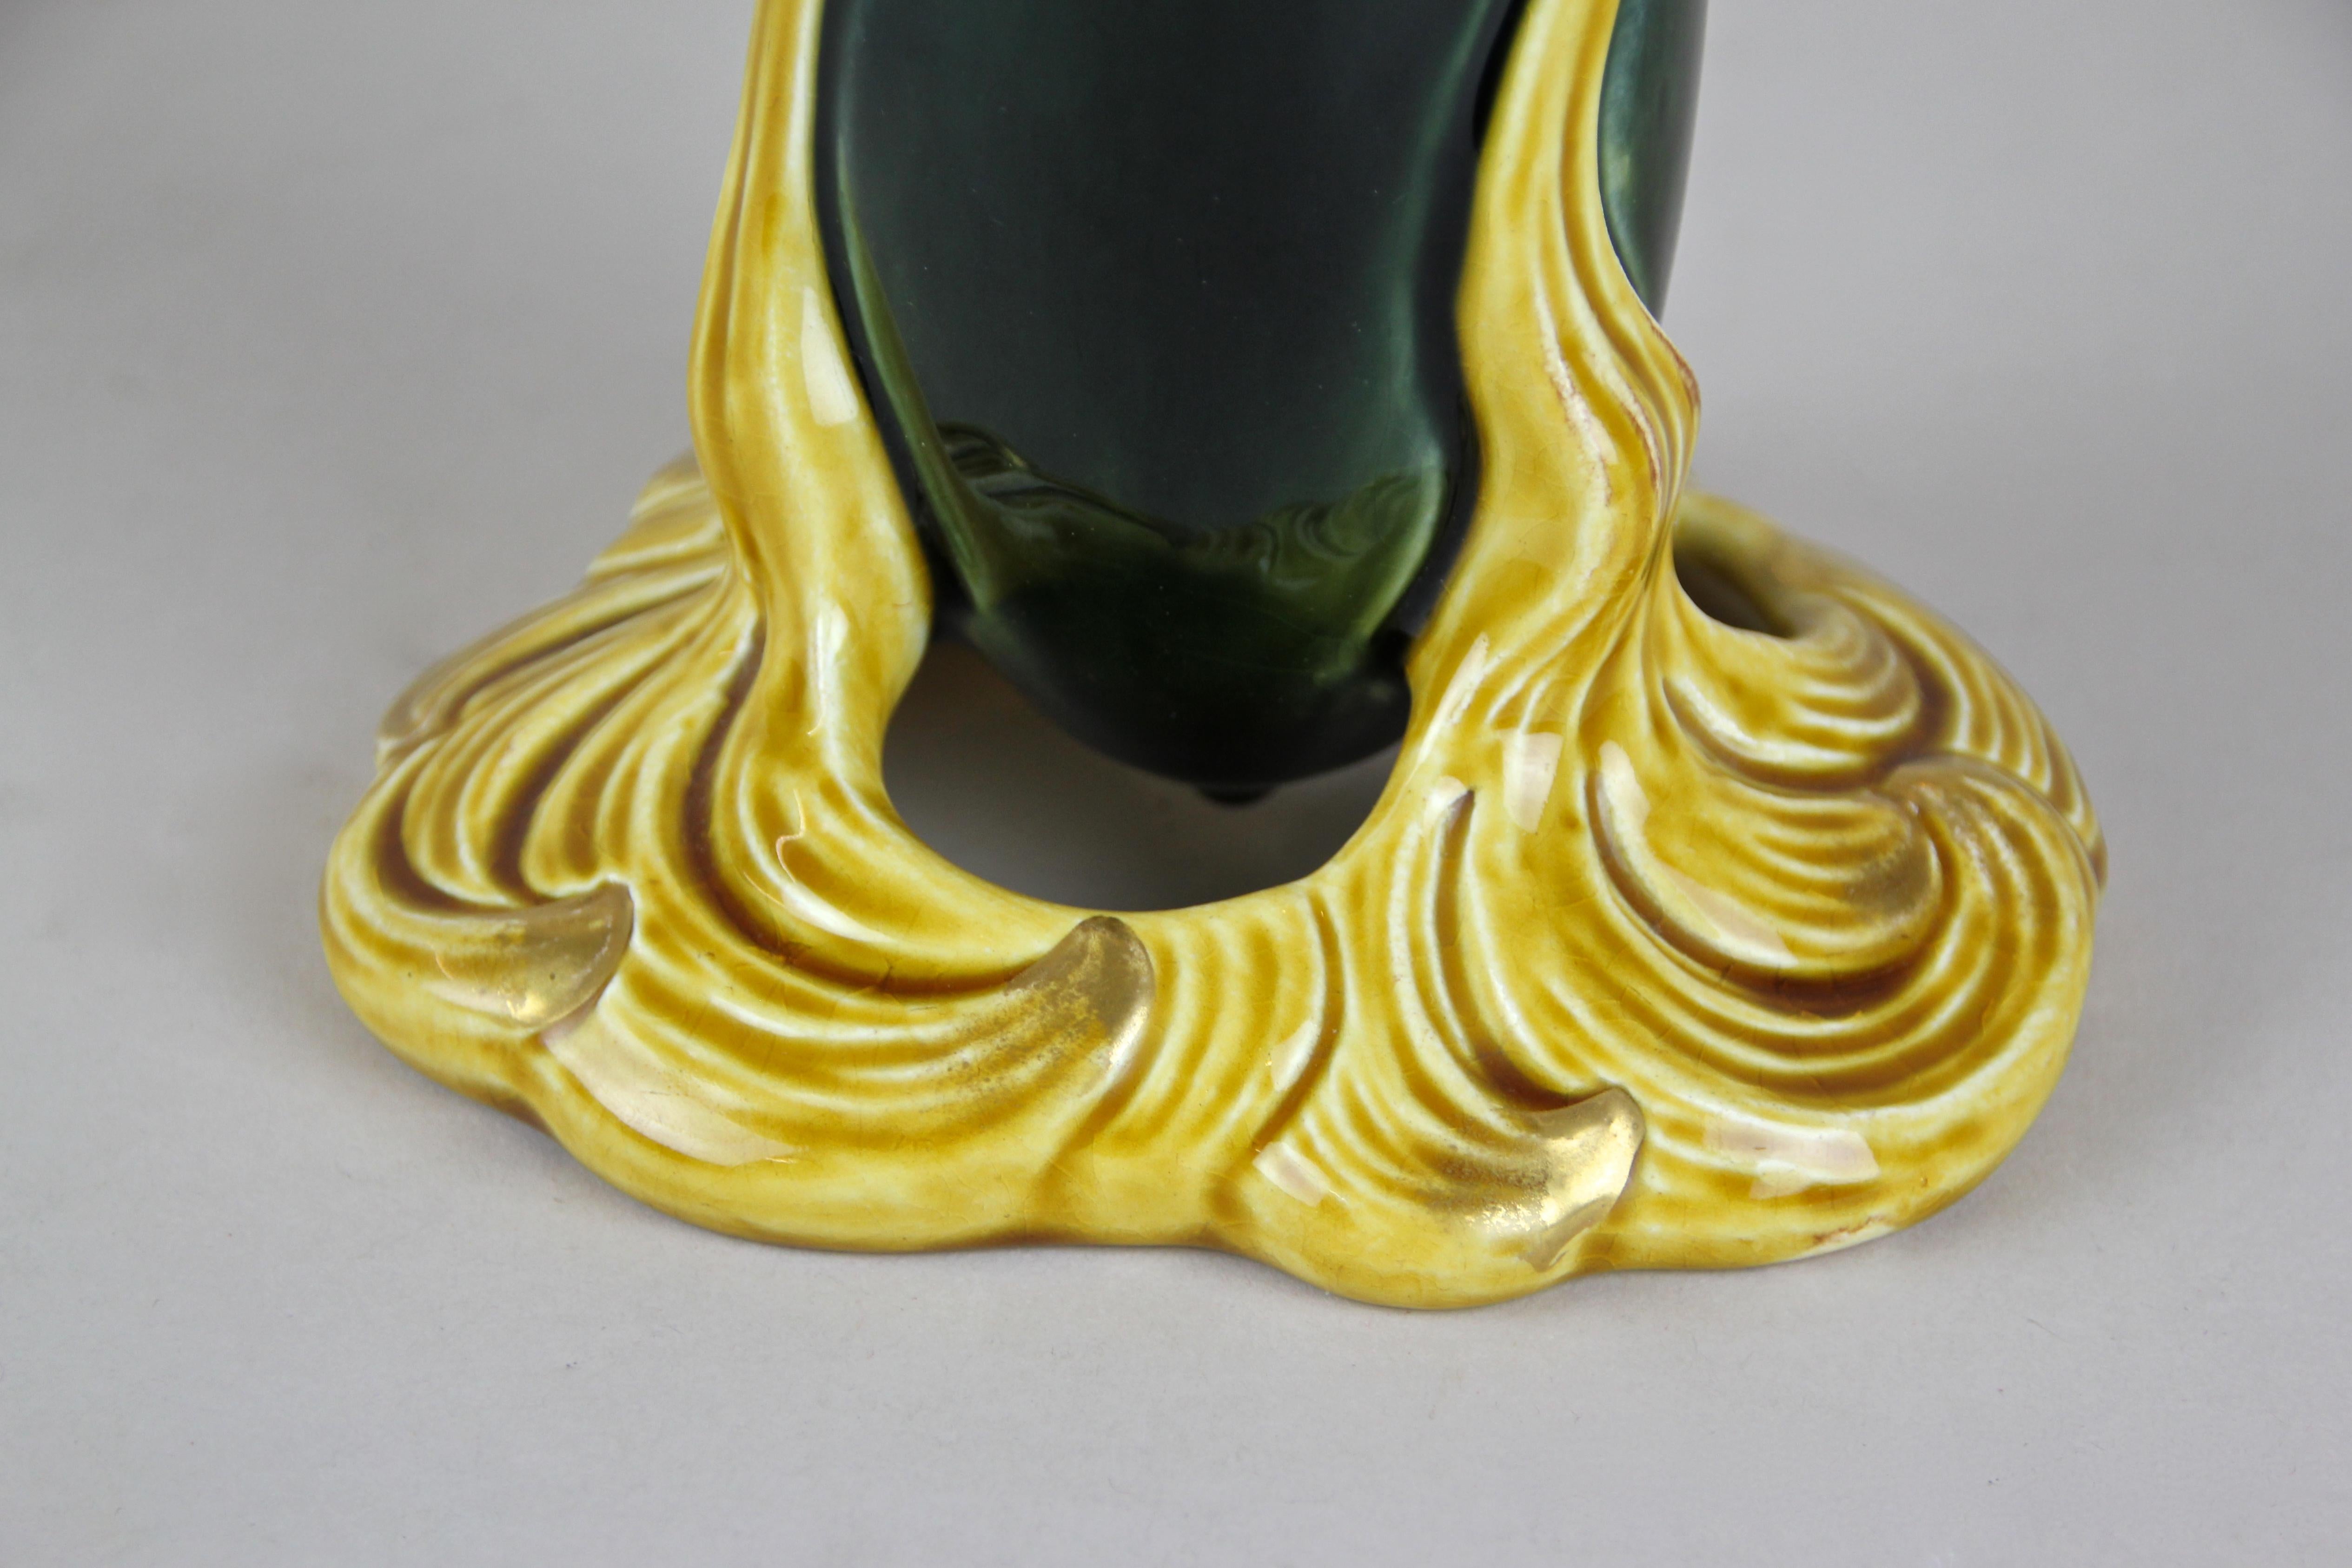 Out of the workshops of Sarreguemines in France around 1915 comes this beautiful slim Art Nouveau Majolica vase. The organic design impresses with its extraordinary twisted shape alongside a great looking glazed surface in nice yellow and very dark